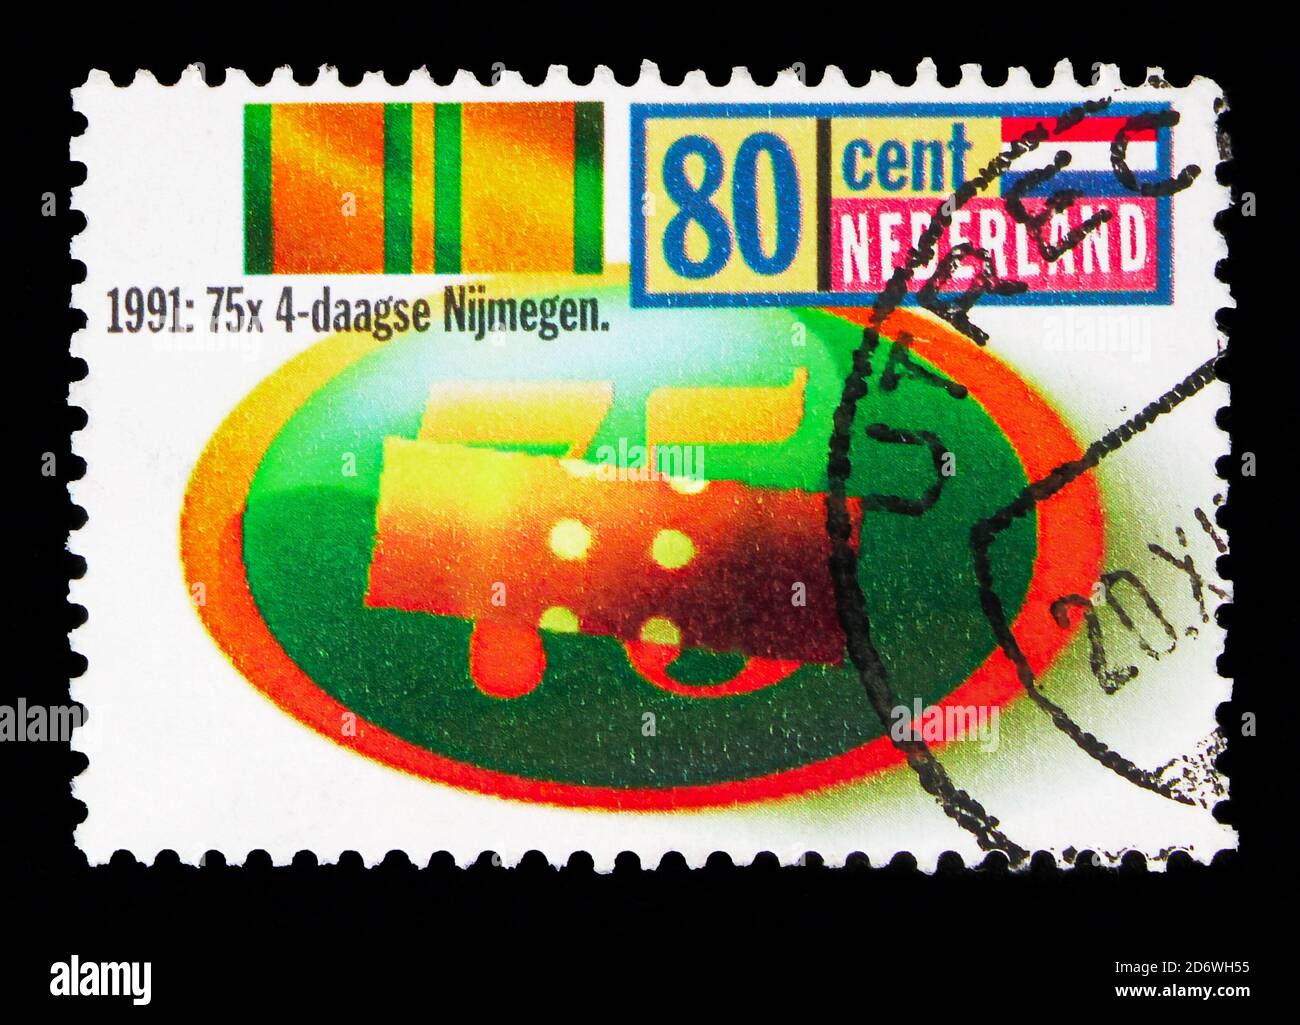 MOSCOW, RUSSIA - MAY 13, 2018: A stamp printed in Netherlands shows Nijmegen International Four Day Marches, serie, circa 1991 Stock Photo